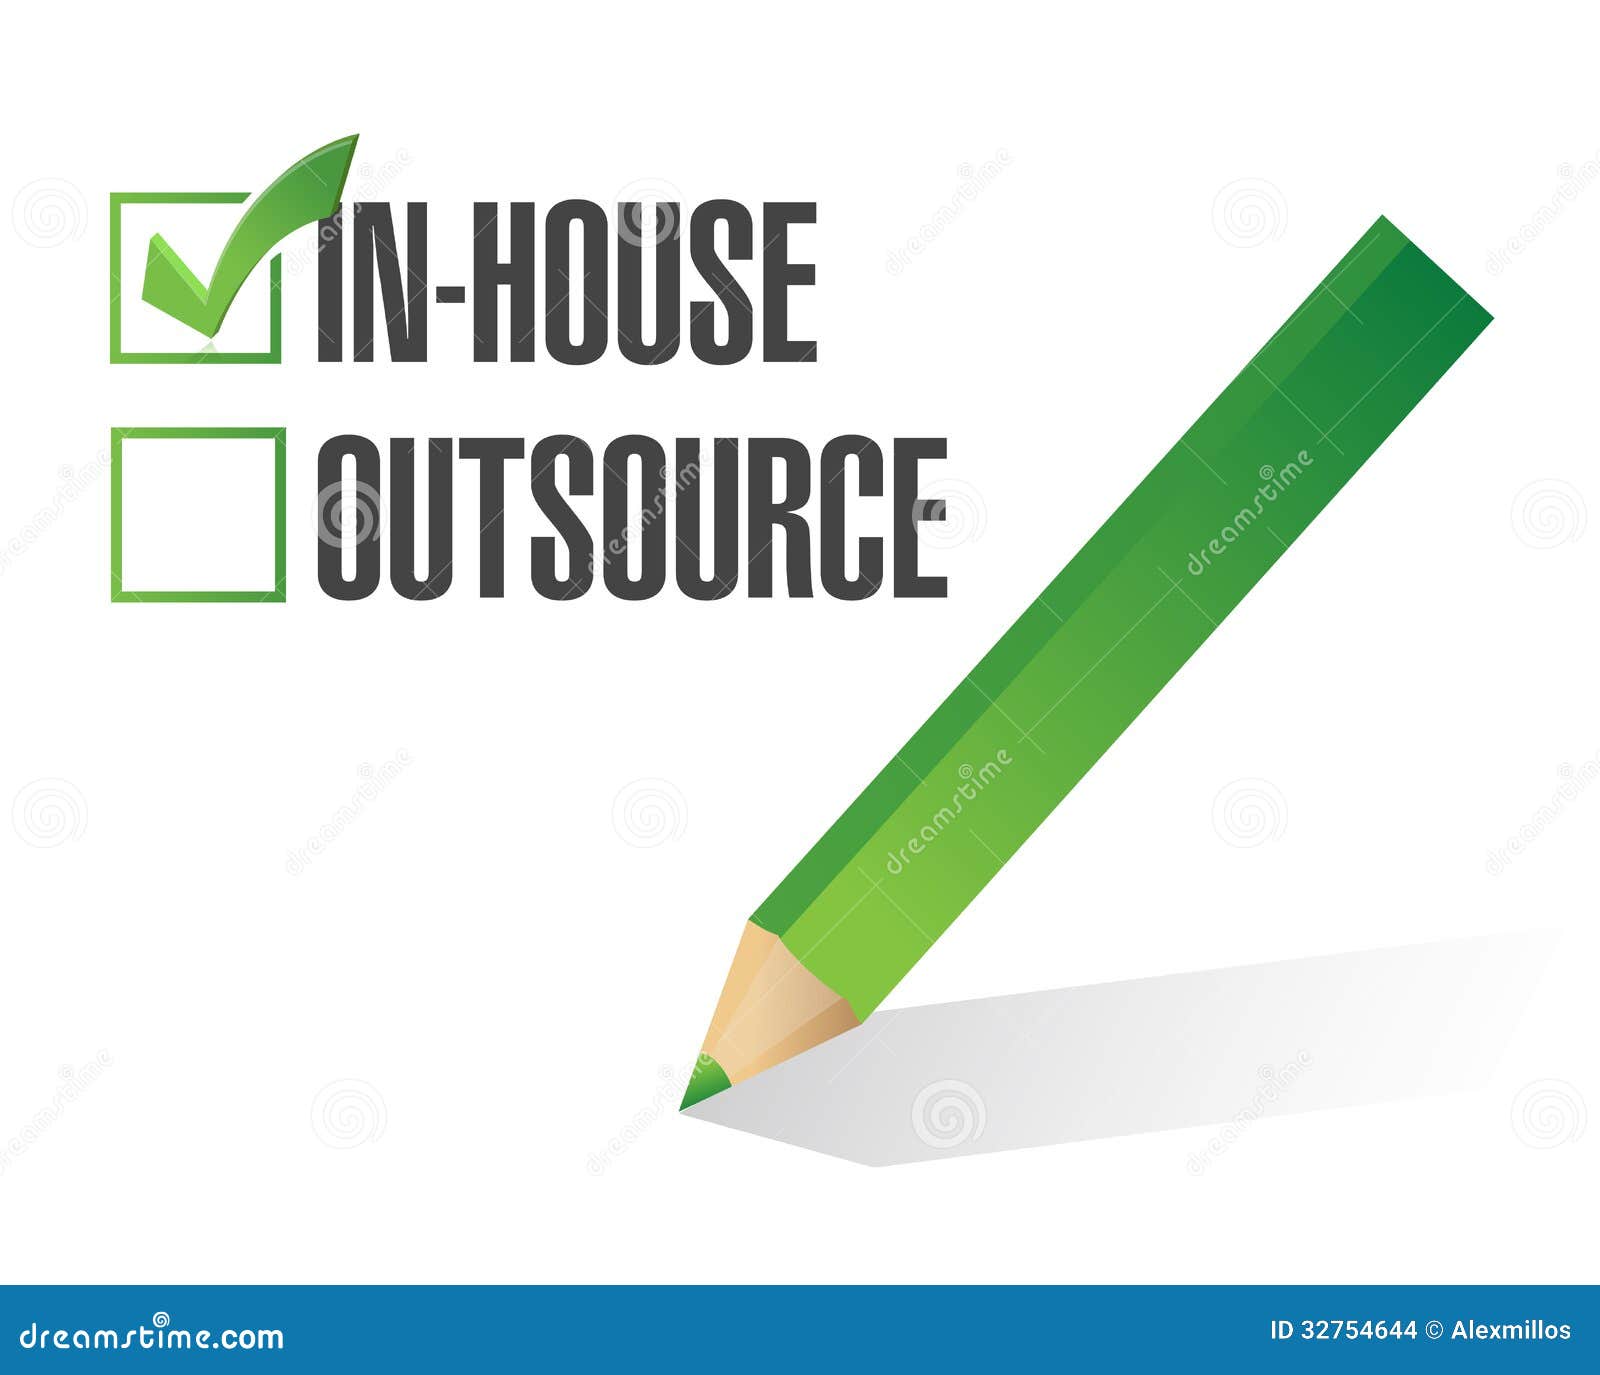 in-house outsource check mark  